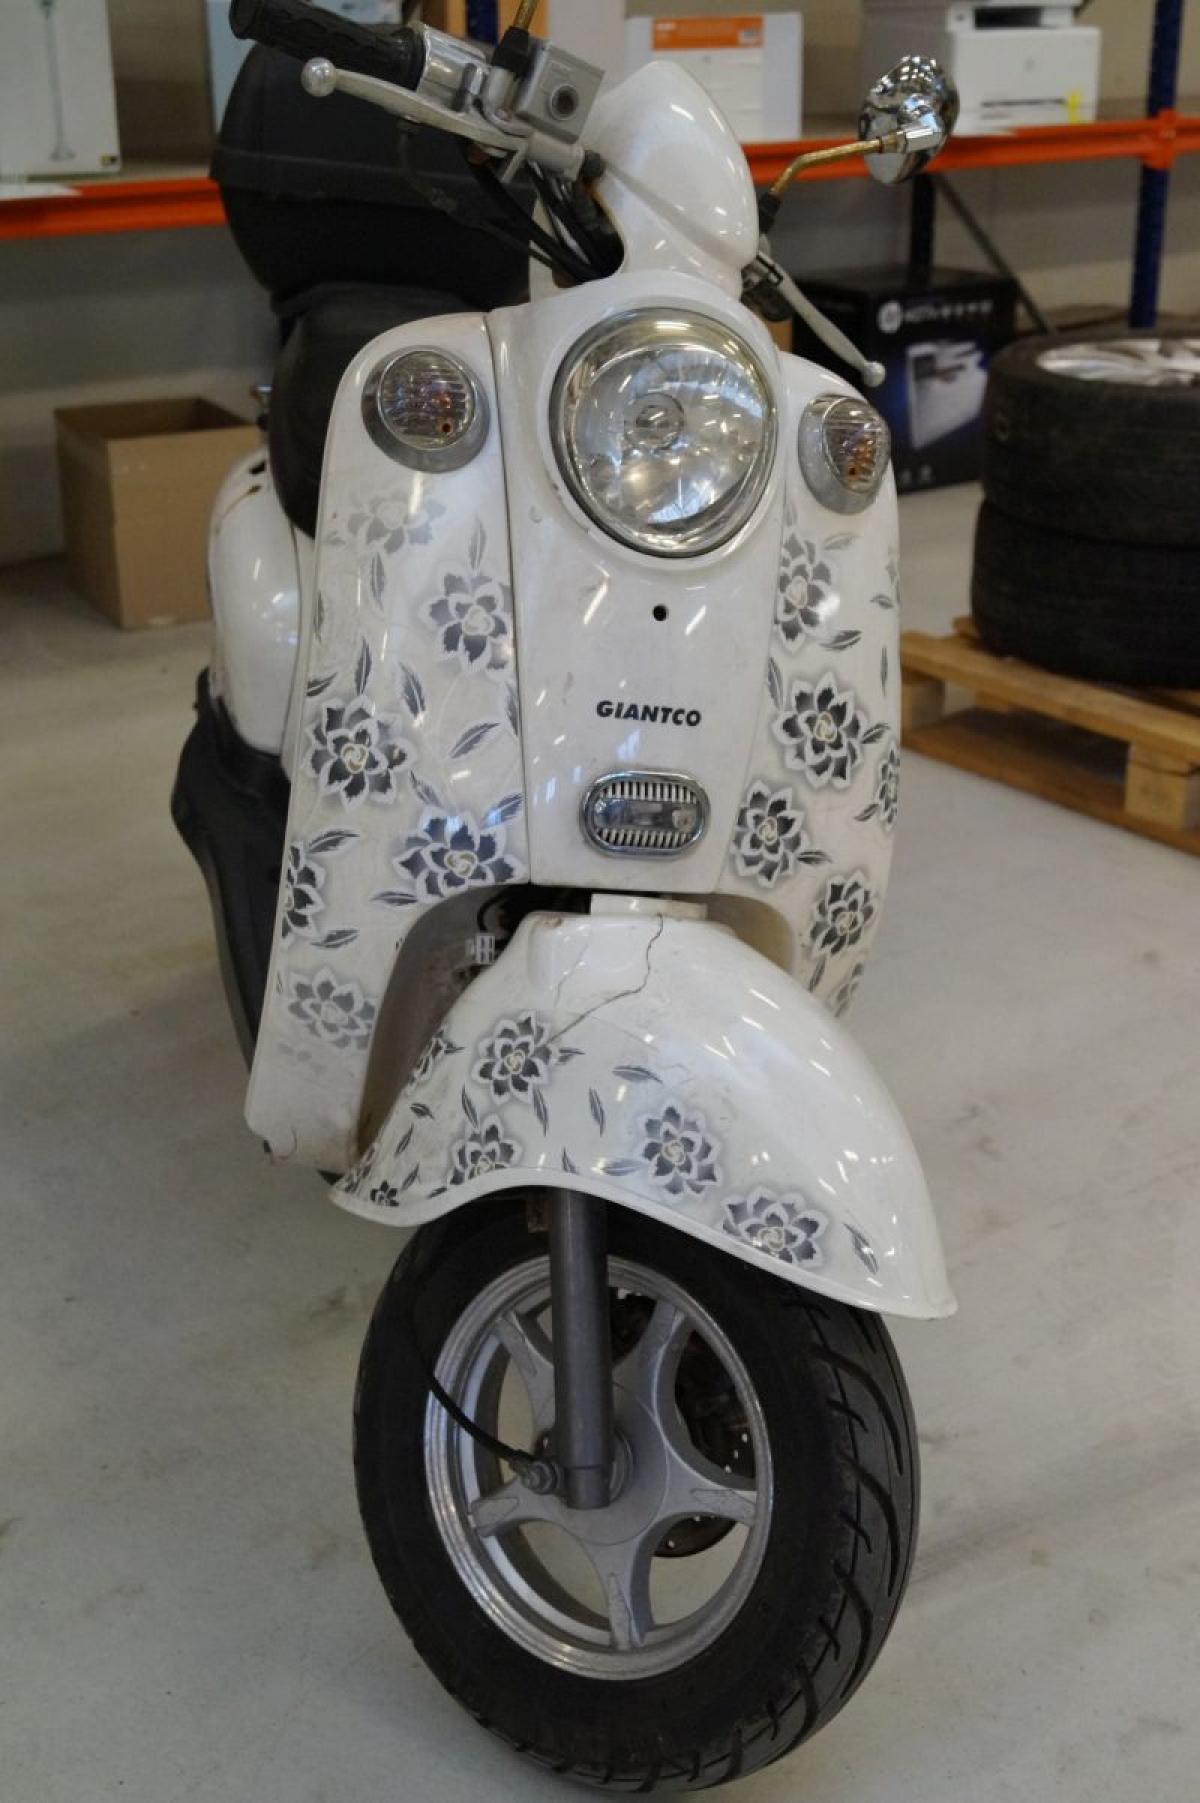 mammal Genbruge stenografi Scooter, mrk. Giantco, driven about 3.450 km, crack in the wing - KJ  Auktion - Machine auctions